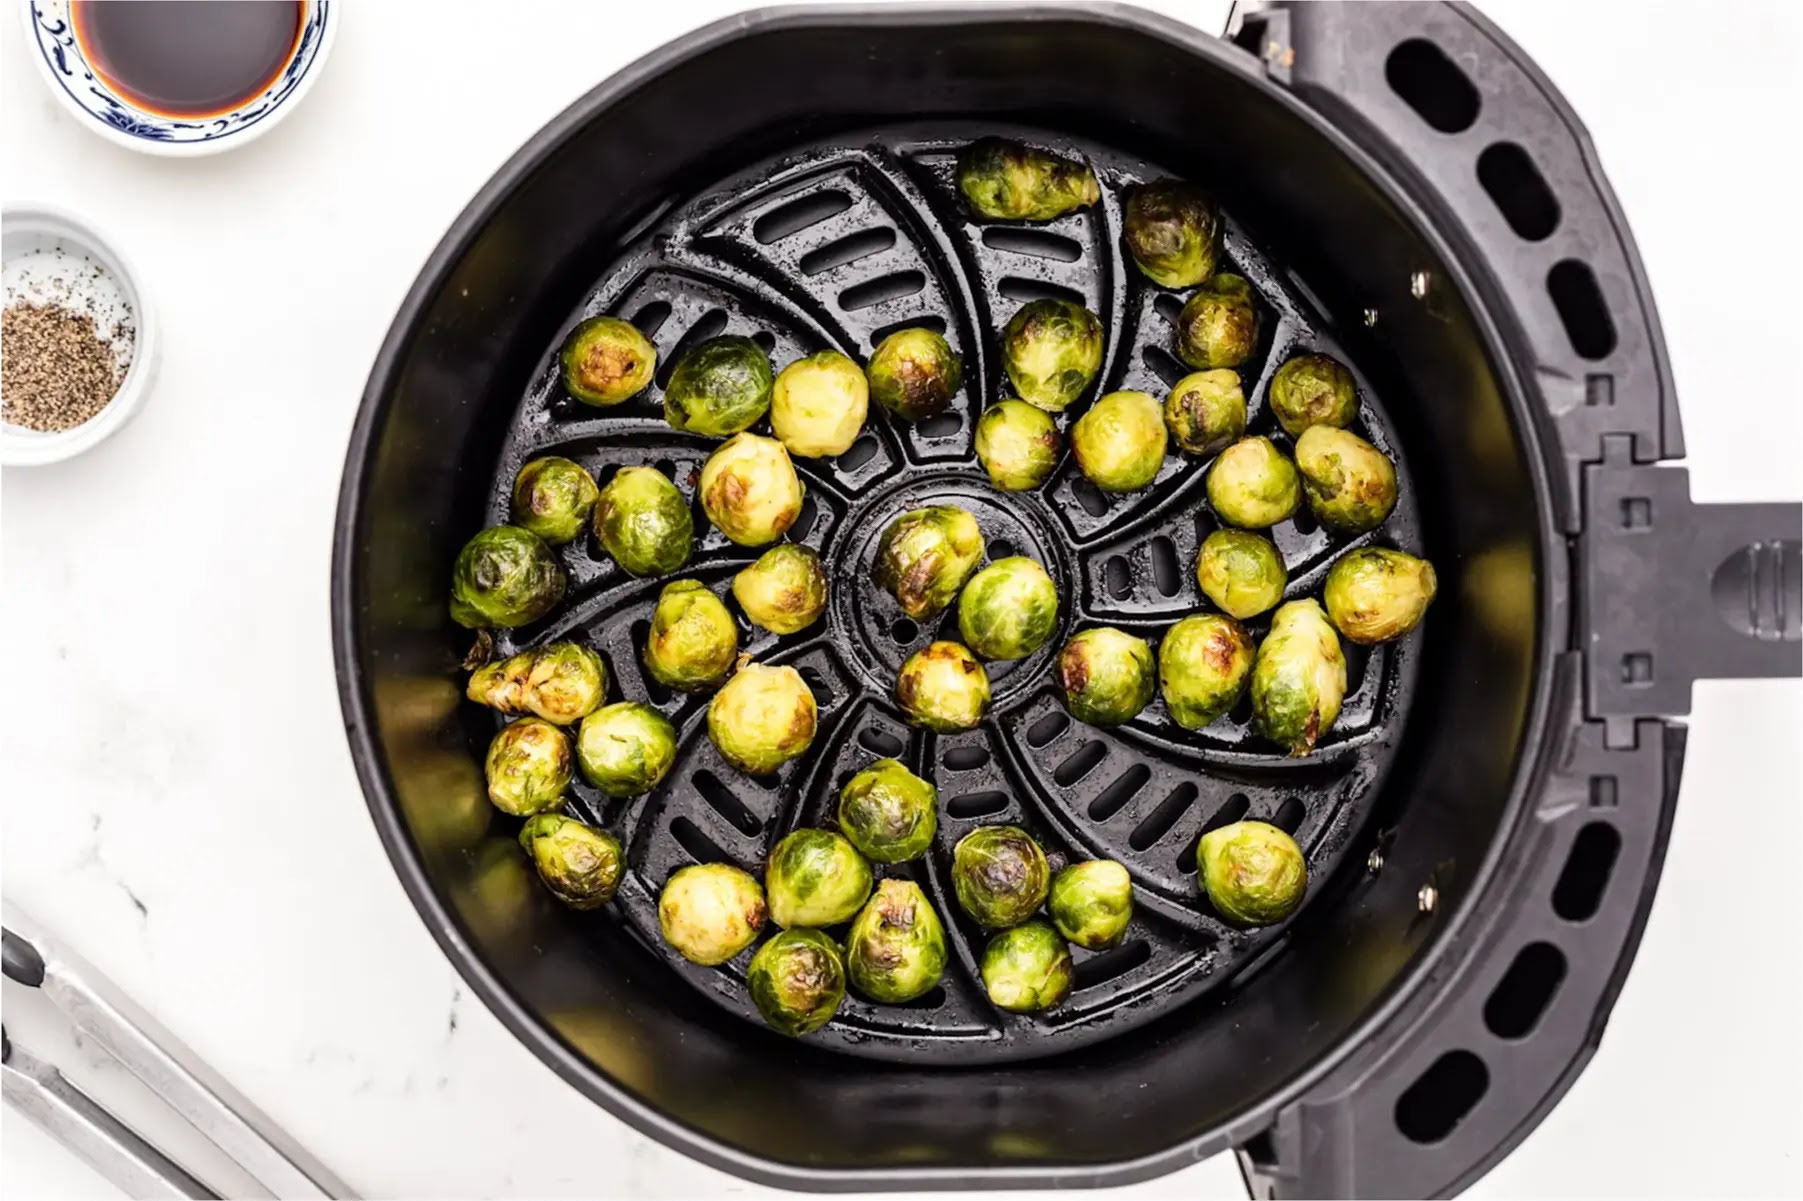 How To Cook Frozen Brussel Sprouts In Air Fryer